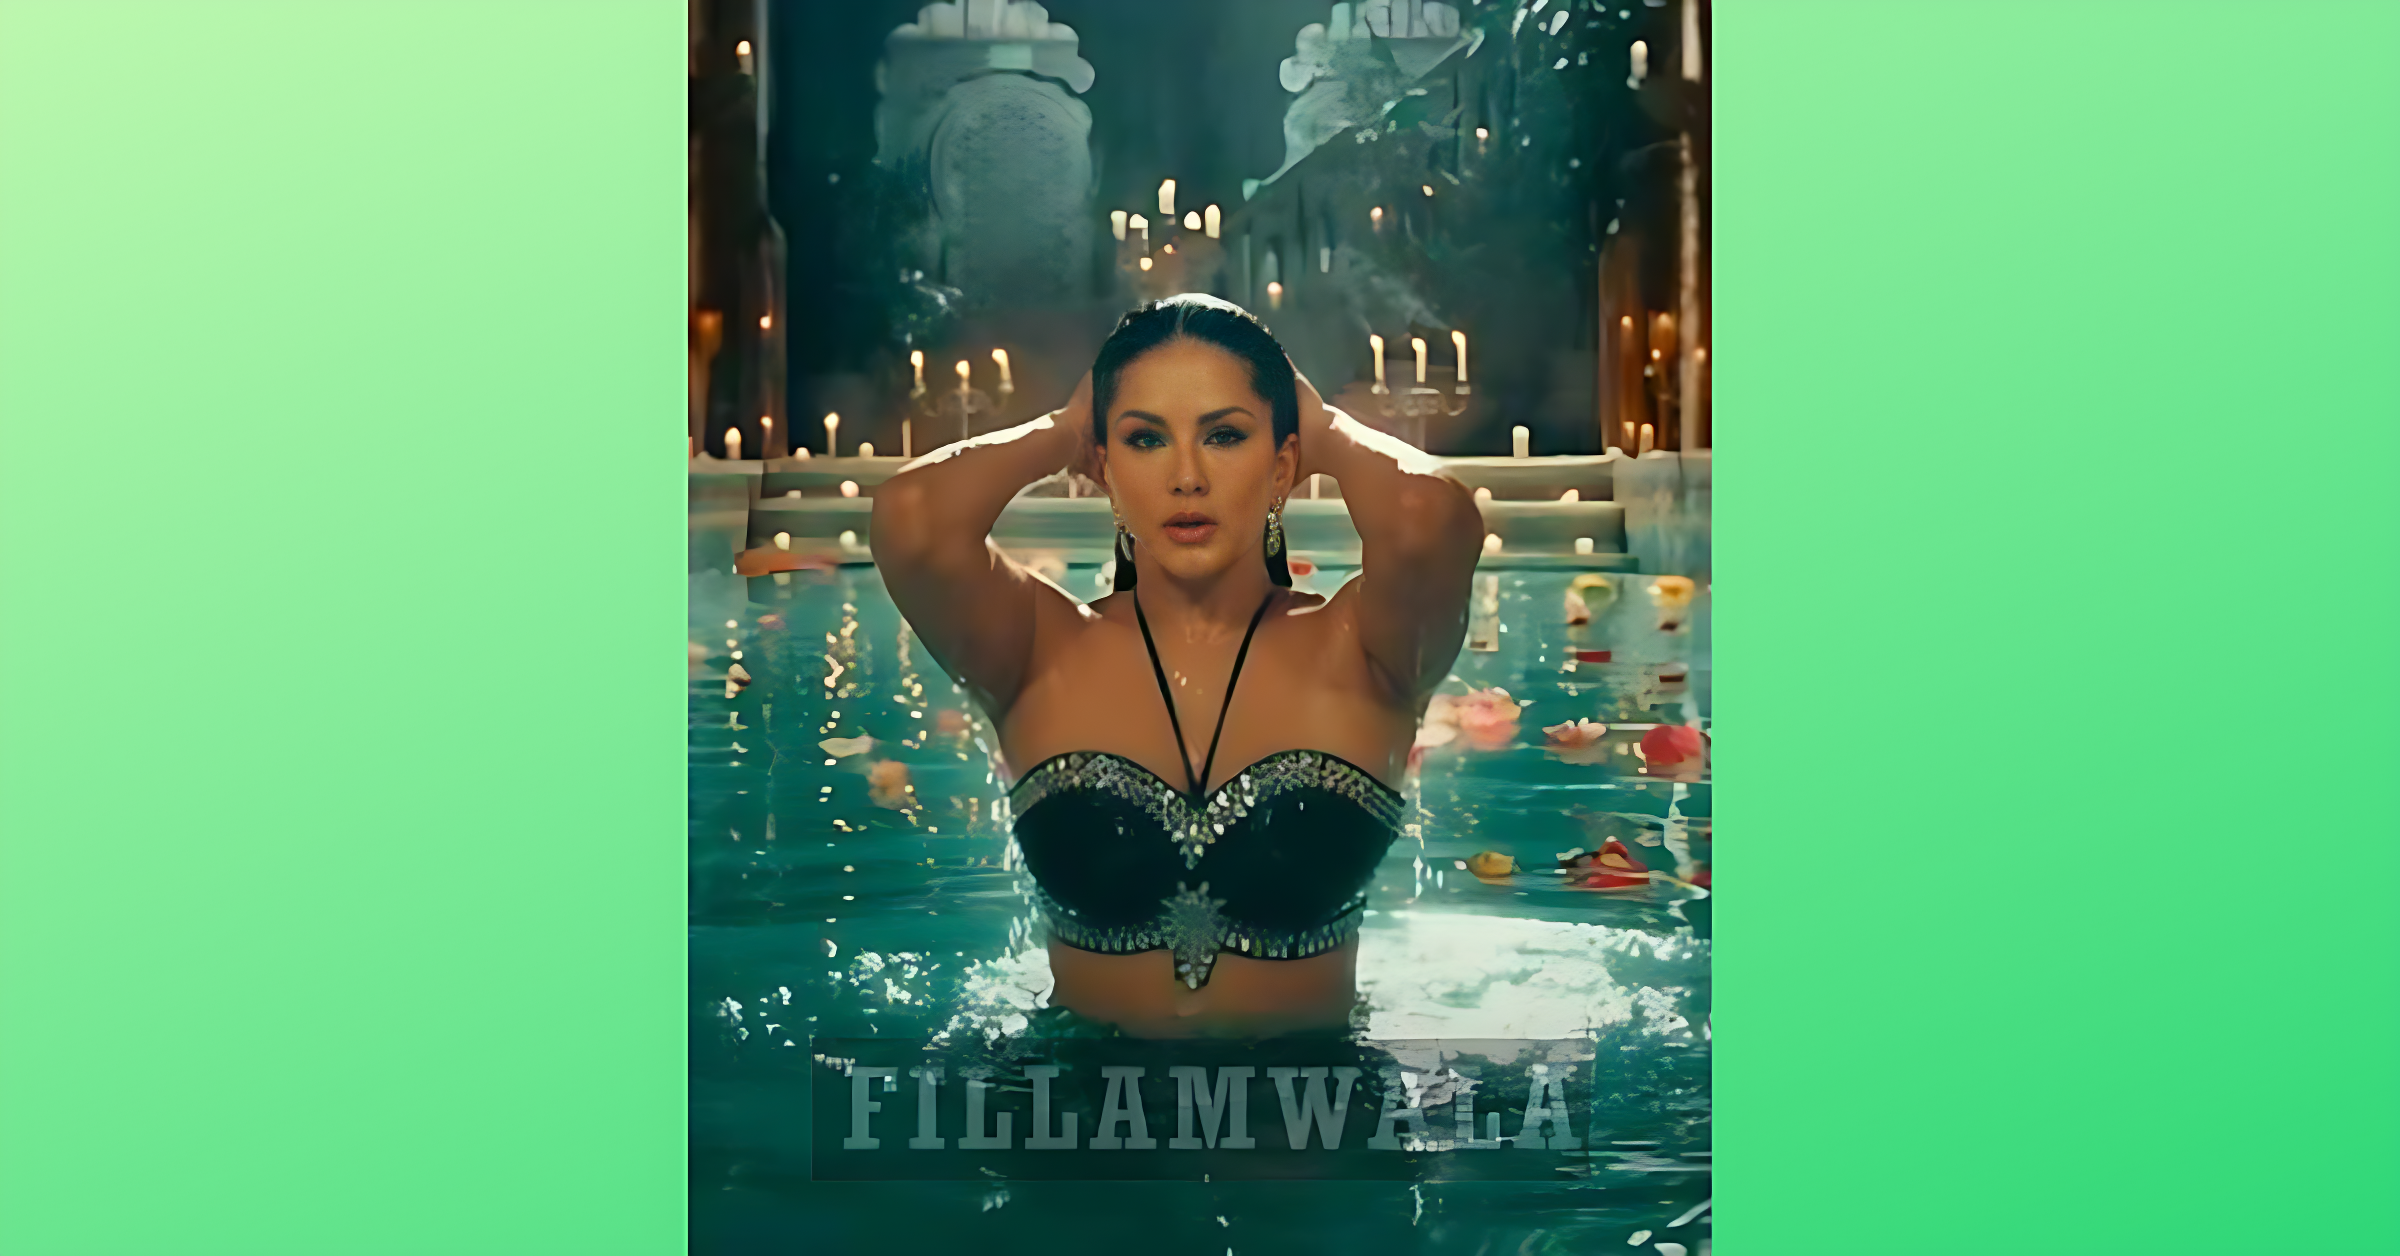 Sunny Leone makes her Kollywood debut as Mayasena, the queen. Watch the trailer for "Oh My Ghost."